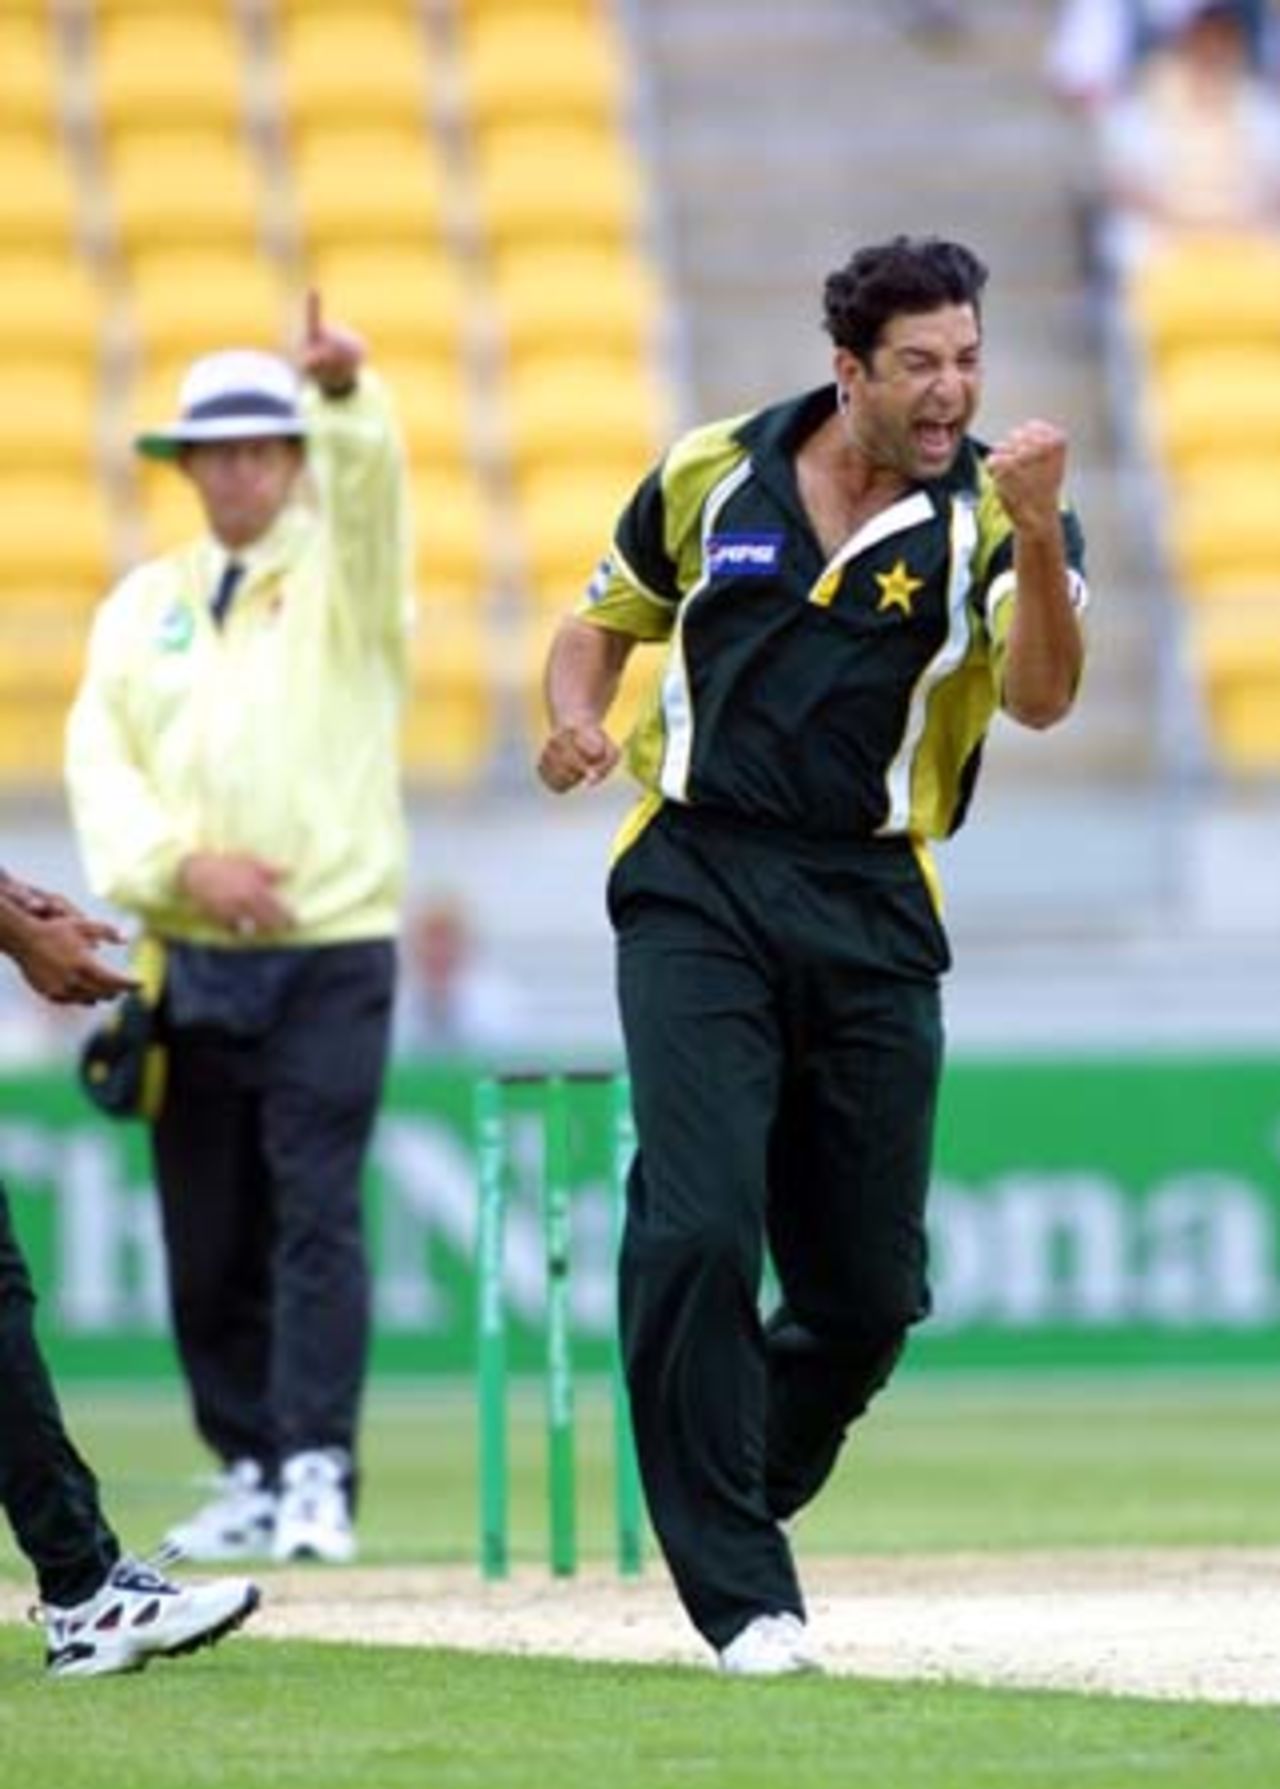 Pakistan opening bowler Wasim Akram punches the air in celebration of dismissing New Zealand opening batsman Stephen Fleming for one, adjudged out leg before wicket by umpire Dave Quested (raising his finger in the background). 3rd One-Day International: New Zealand v Pakistan at WestpacTrust Stadium, Wellington, 22 February 2001.